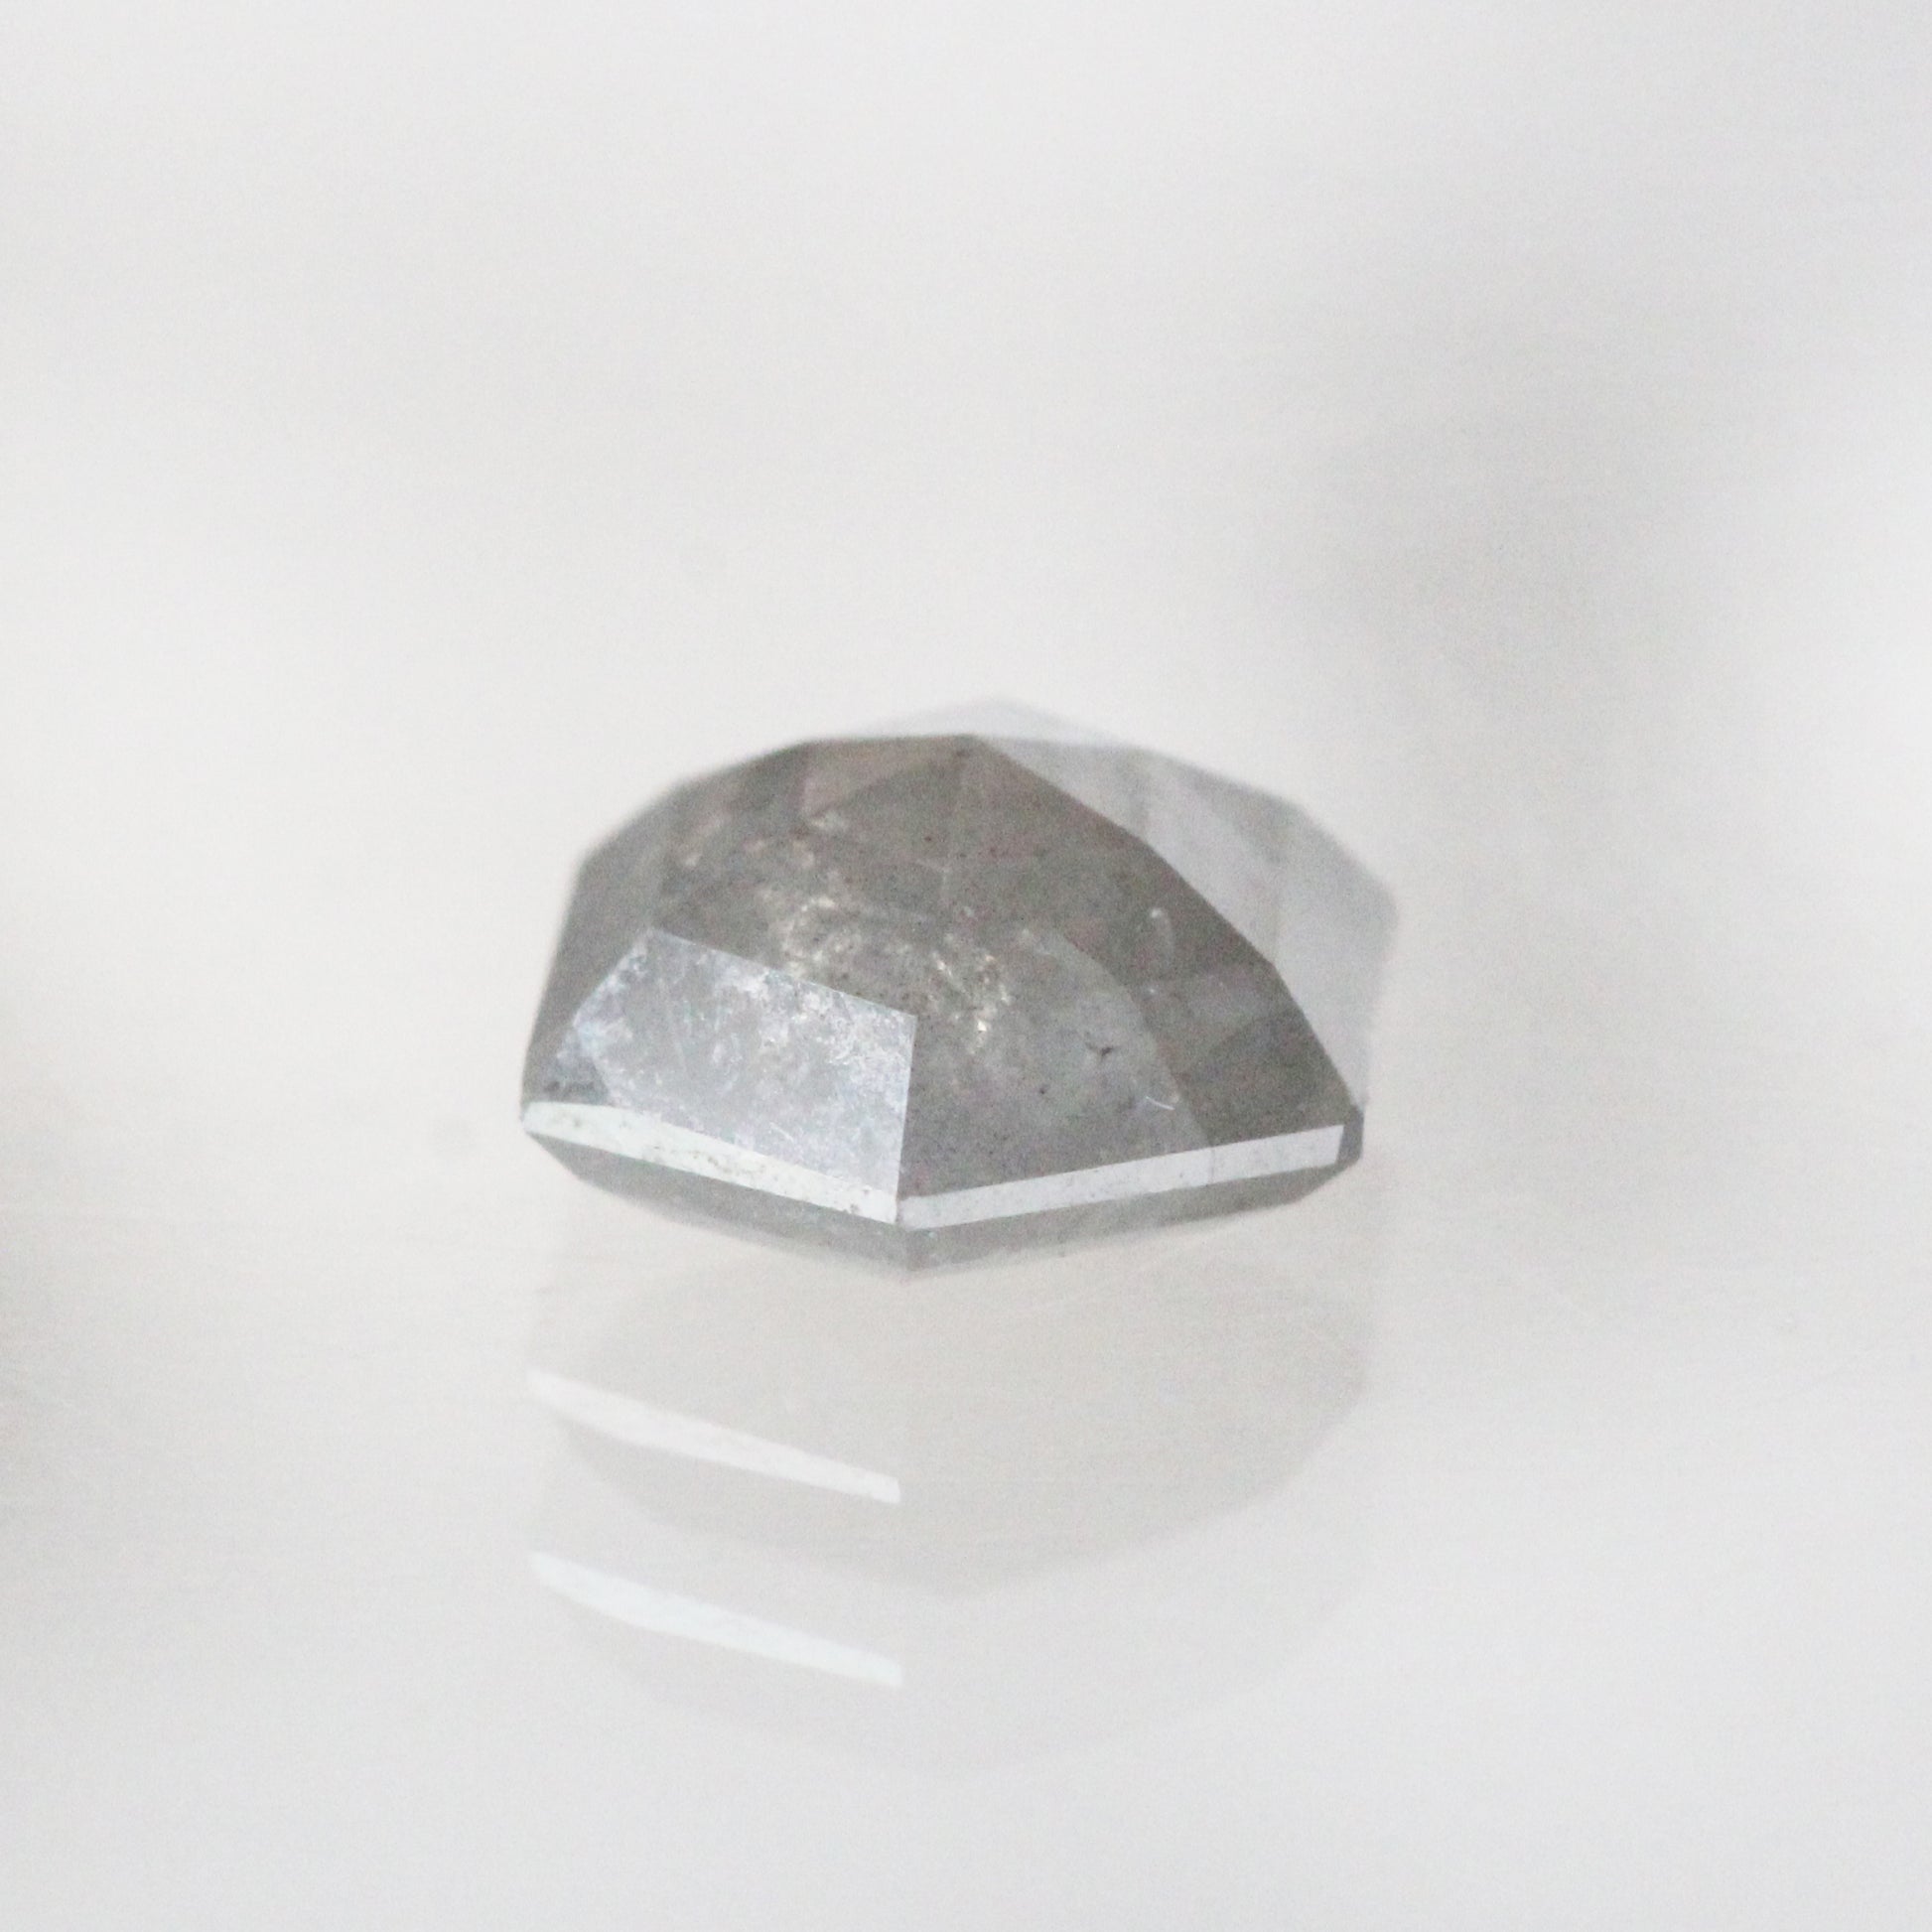 1.28 Carat Gray Hexagon Diamond for Custom Work - Inventory Code GHD128 - Midwinter Co. Alternative Bridal Rings and Modern Fine Jewelry